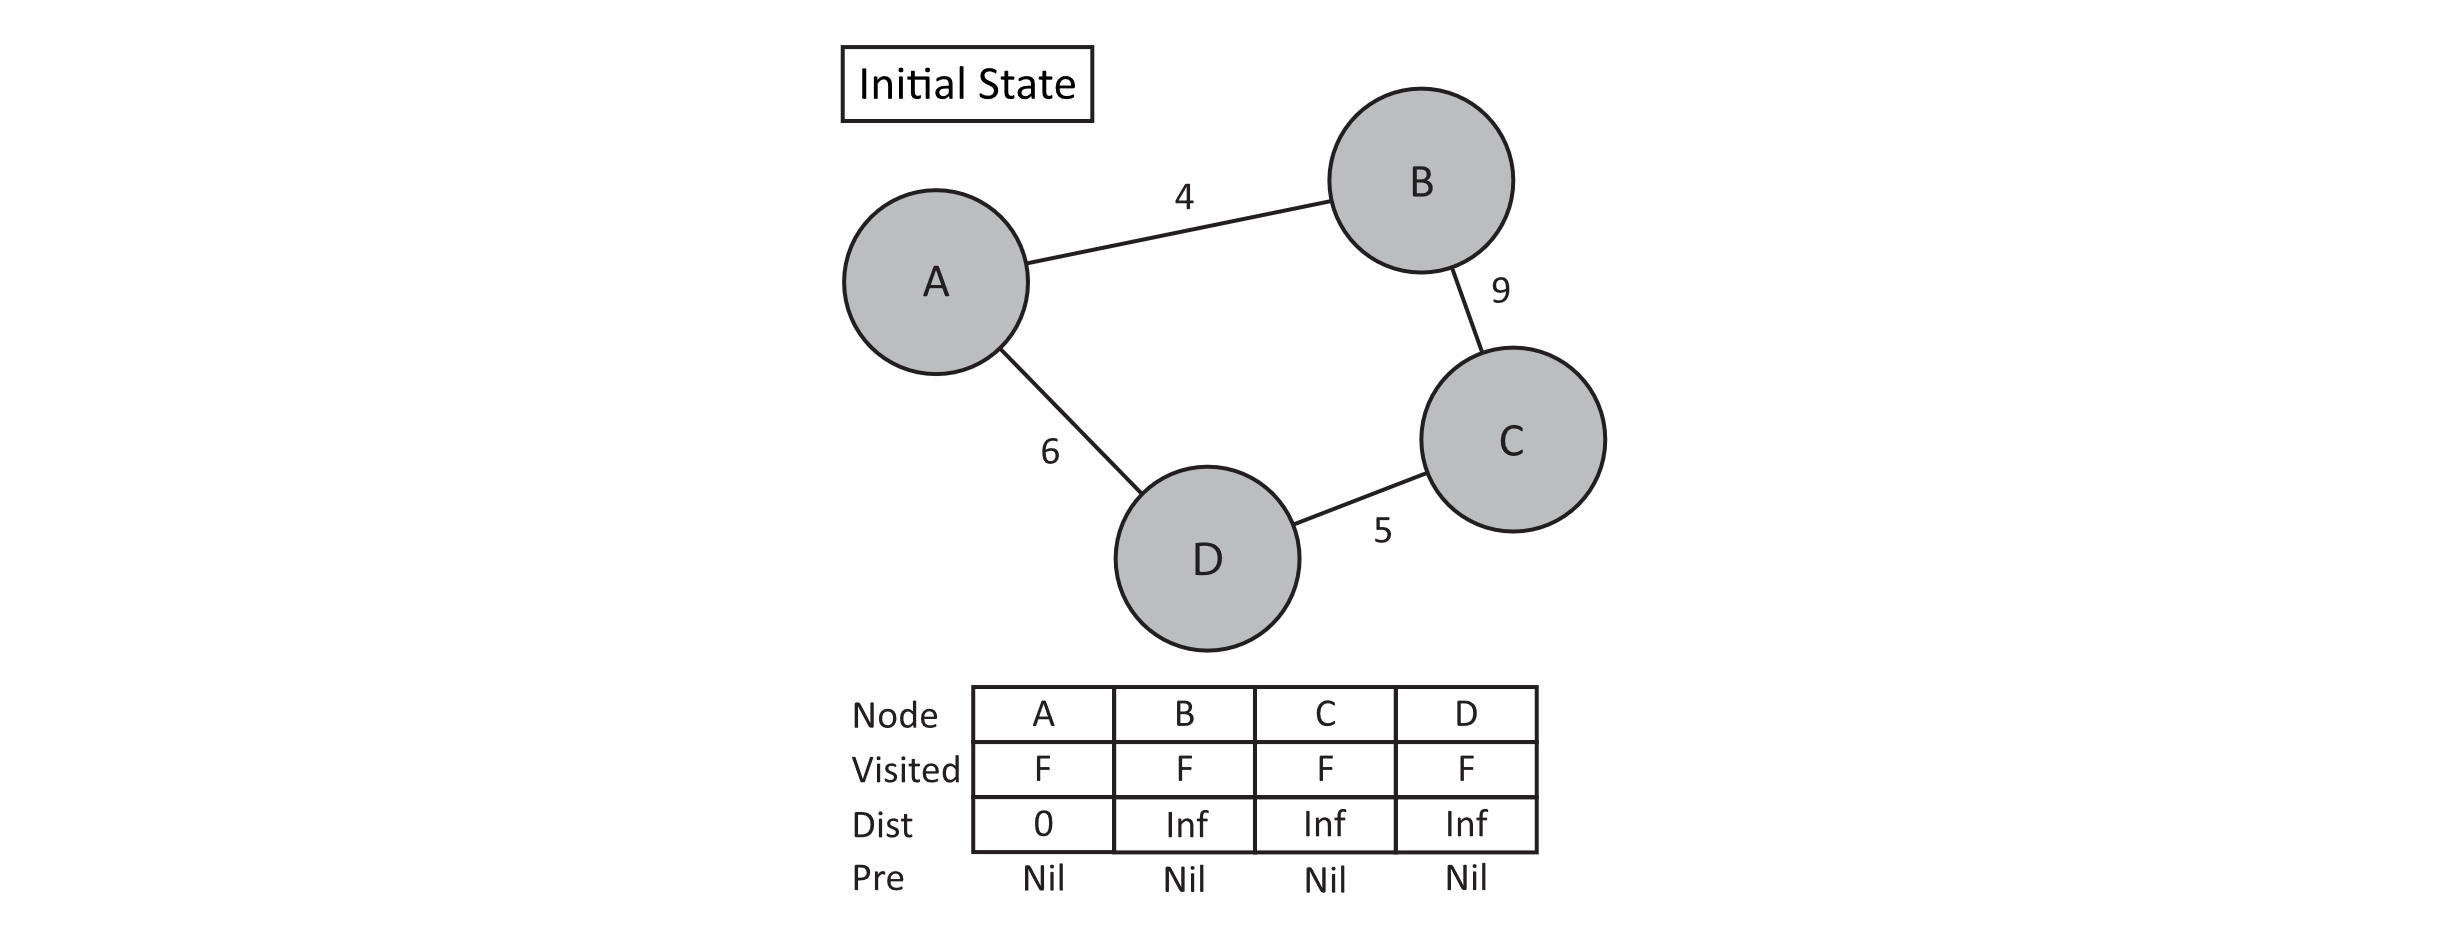 Initial state of Dijkstra's algorithm for a graph of 4 nodes.